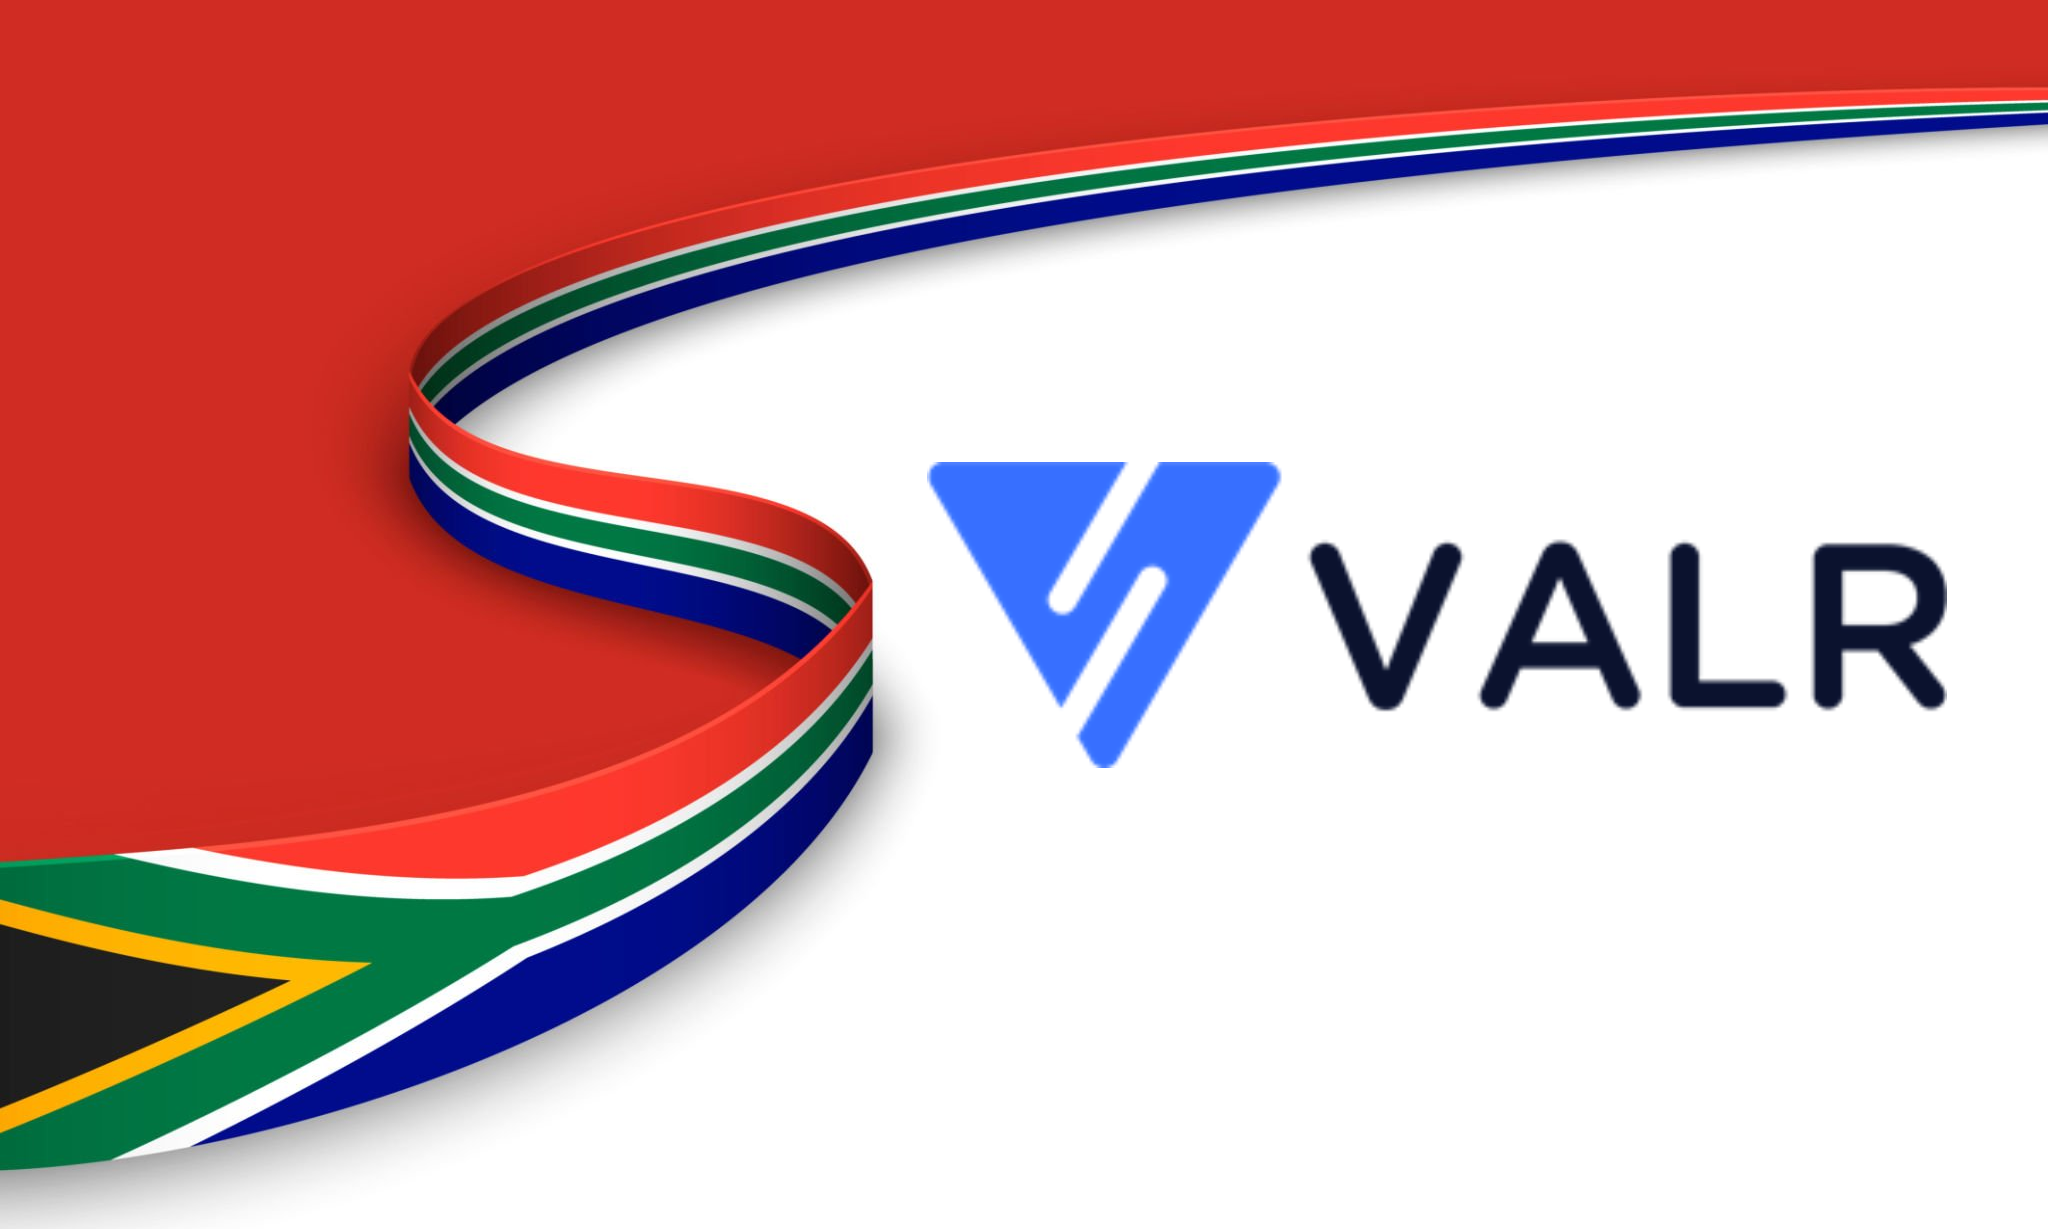 South African cryptocurrency exchange VALR has been granted new crypto asset service provider (CASP) licenses from the country's Financial Sector Conduct Authority, making it one of the first firms in the nation to receive both Category I and II licenses.